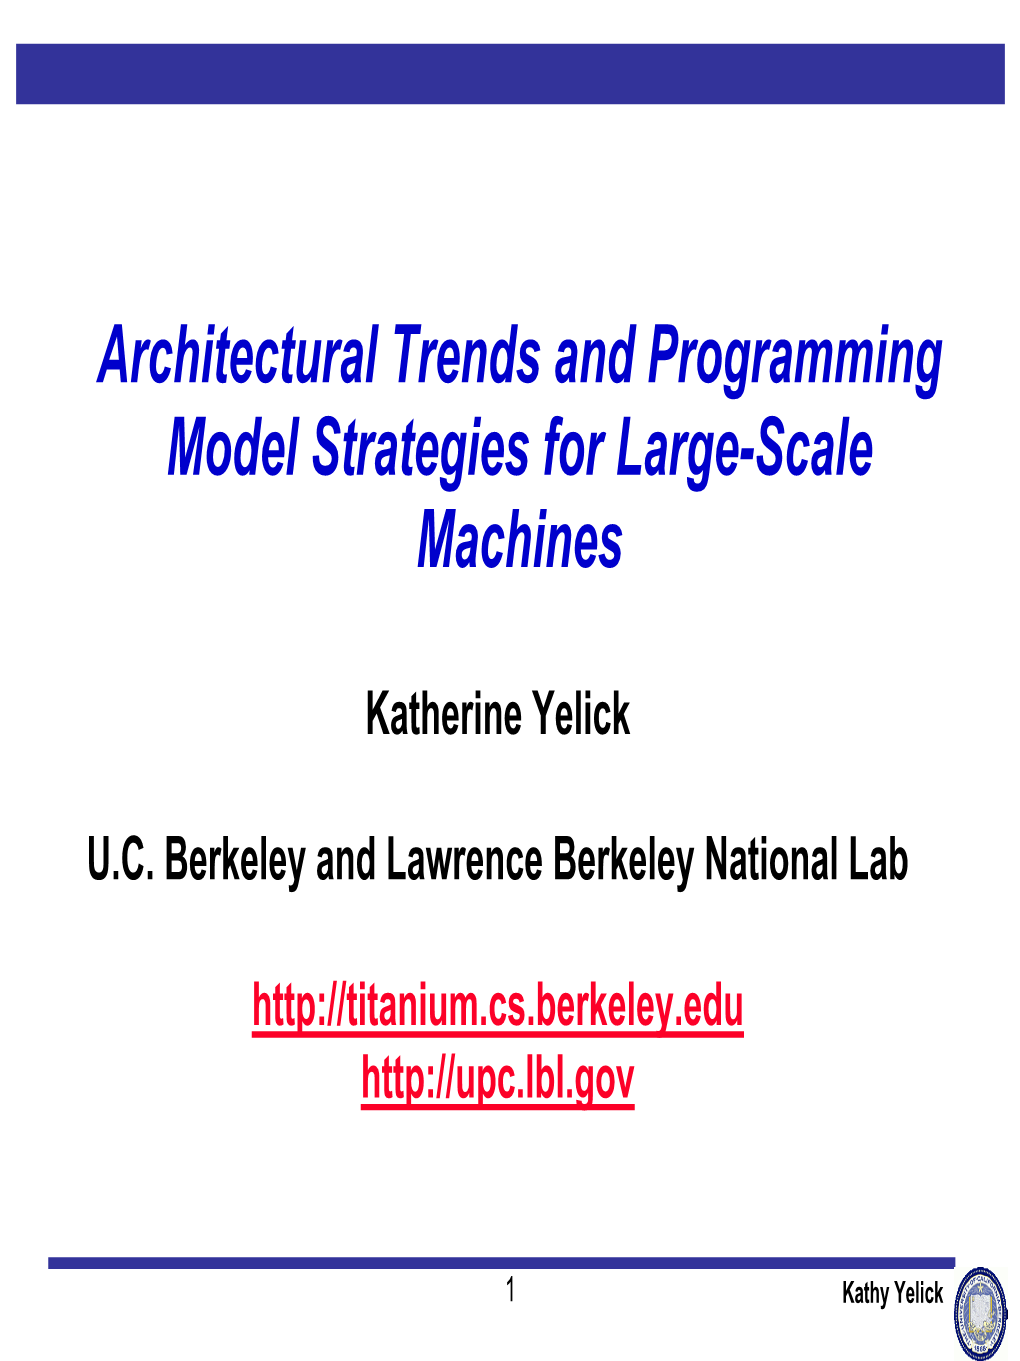 Architectural Trends and Programming Model Strategies for Large-Scale Machines